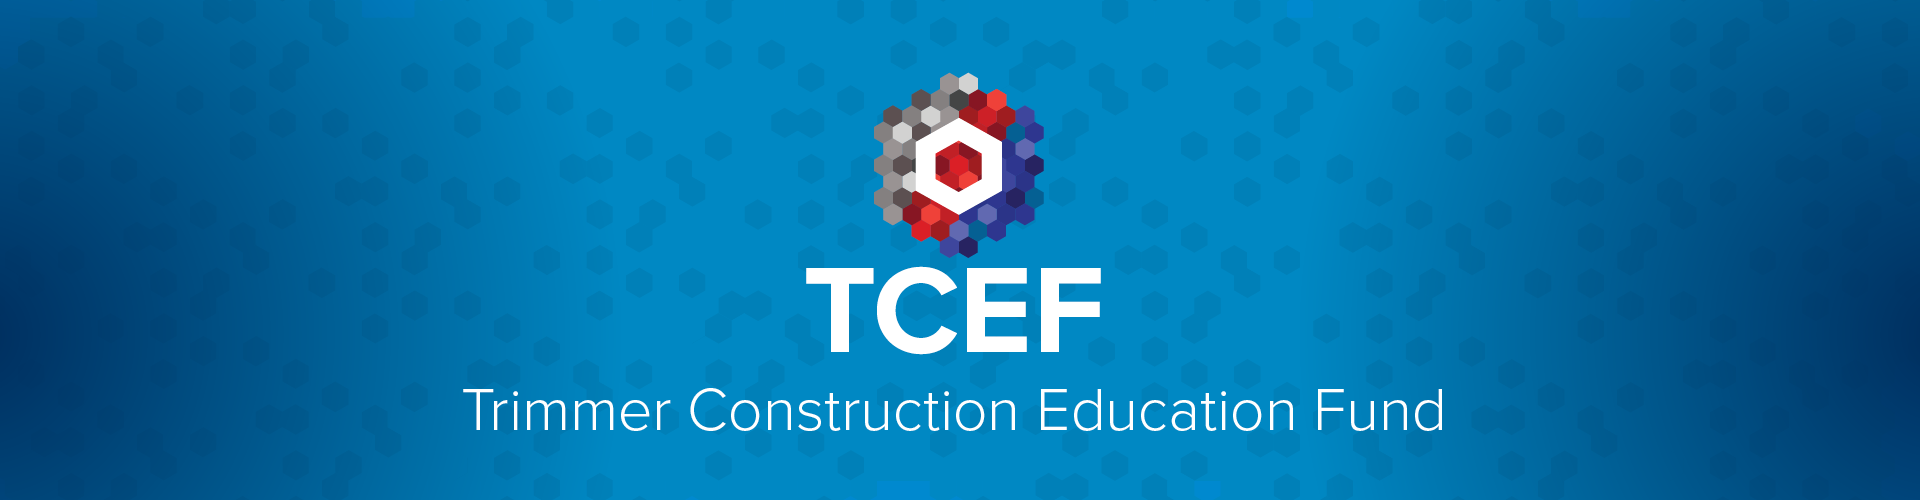 TCEF Banner